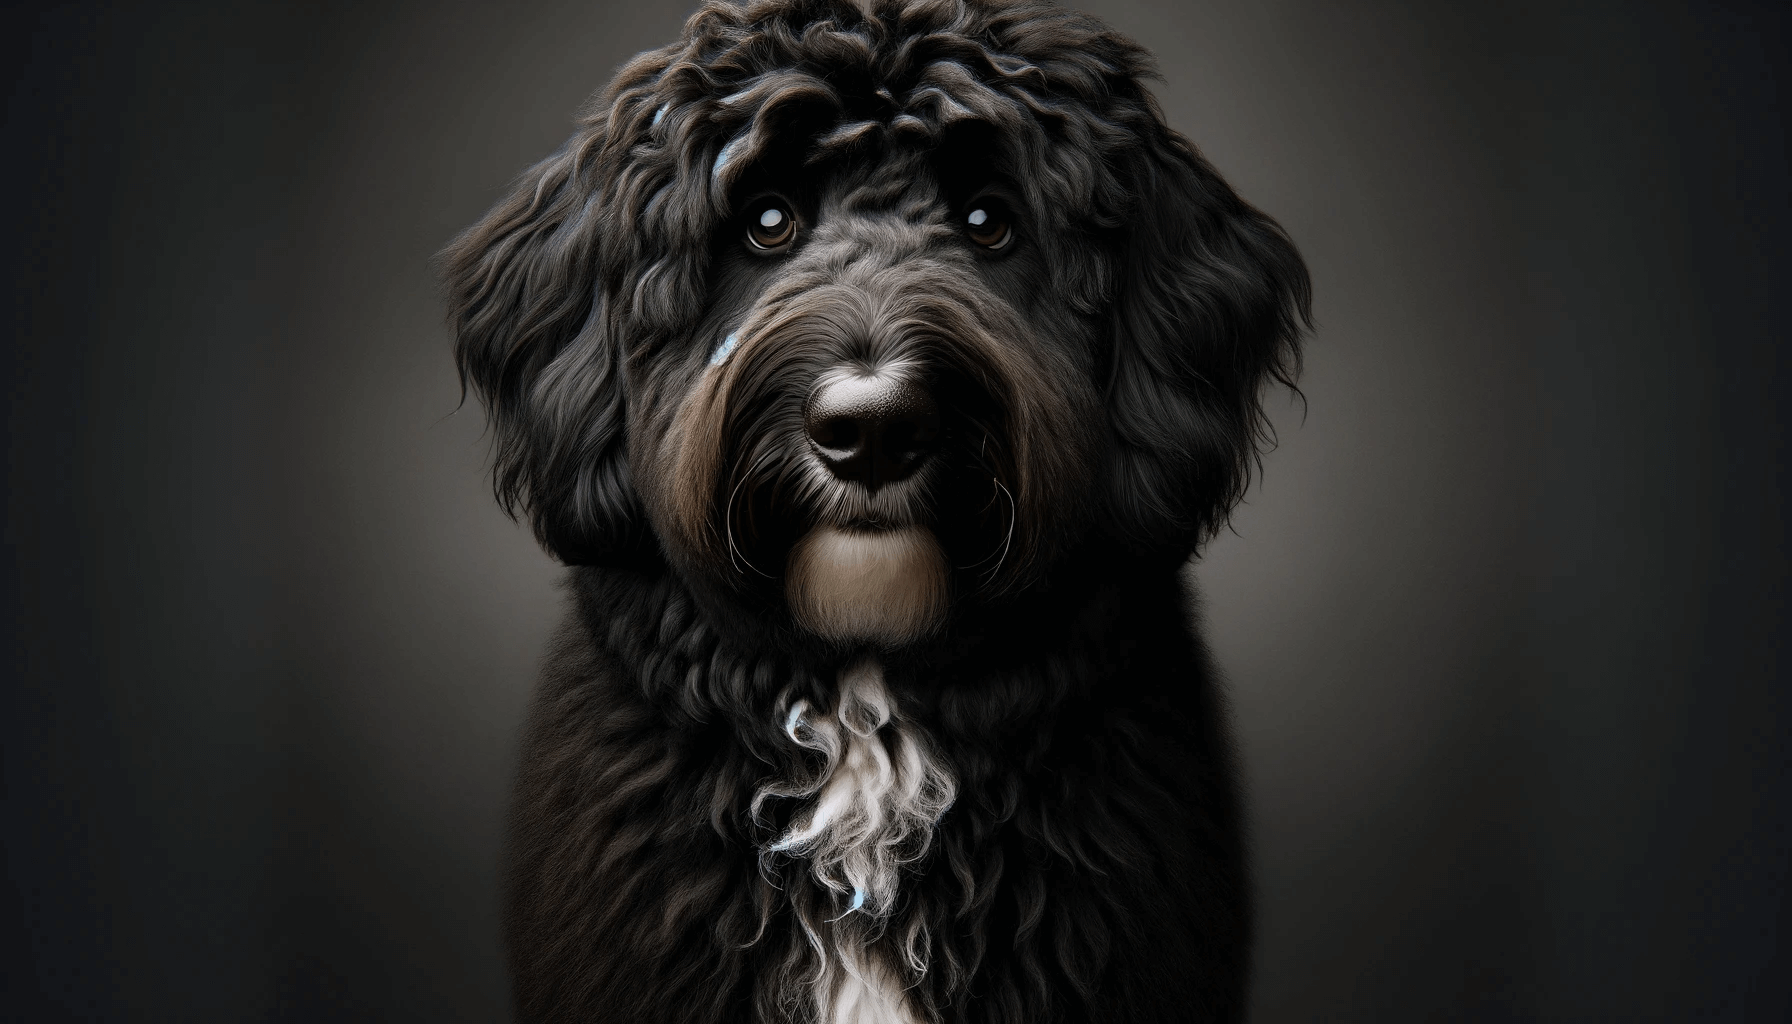 Black Aussiedoodle standing and looking directly at the camera, its coat fluffy and black with a slight wave to the fur